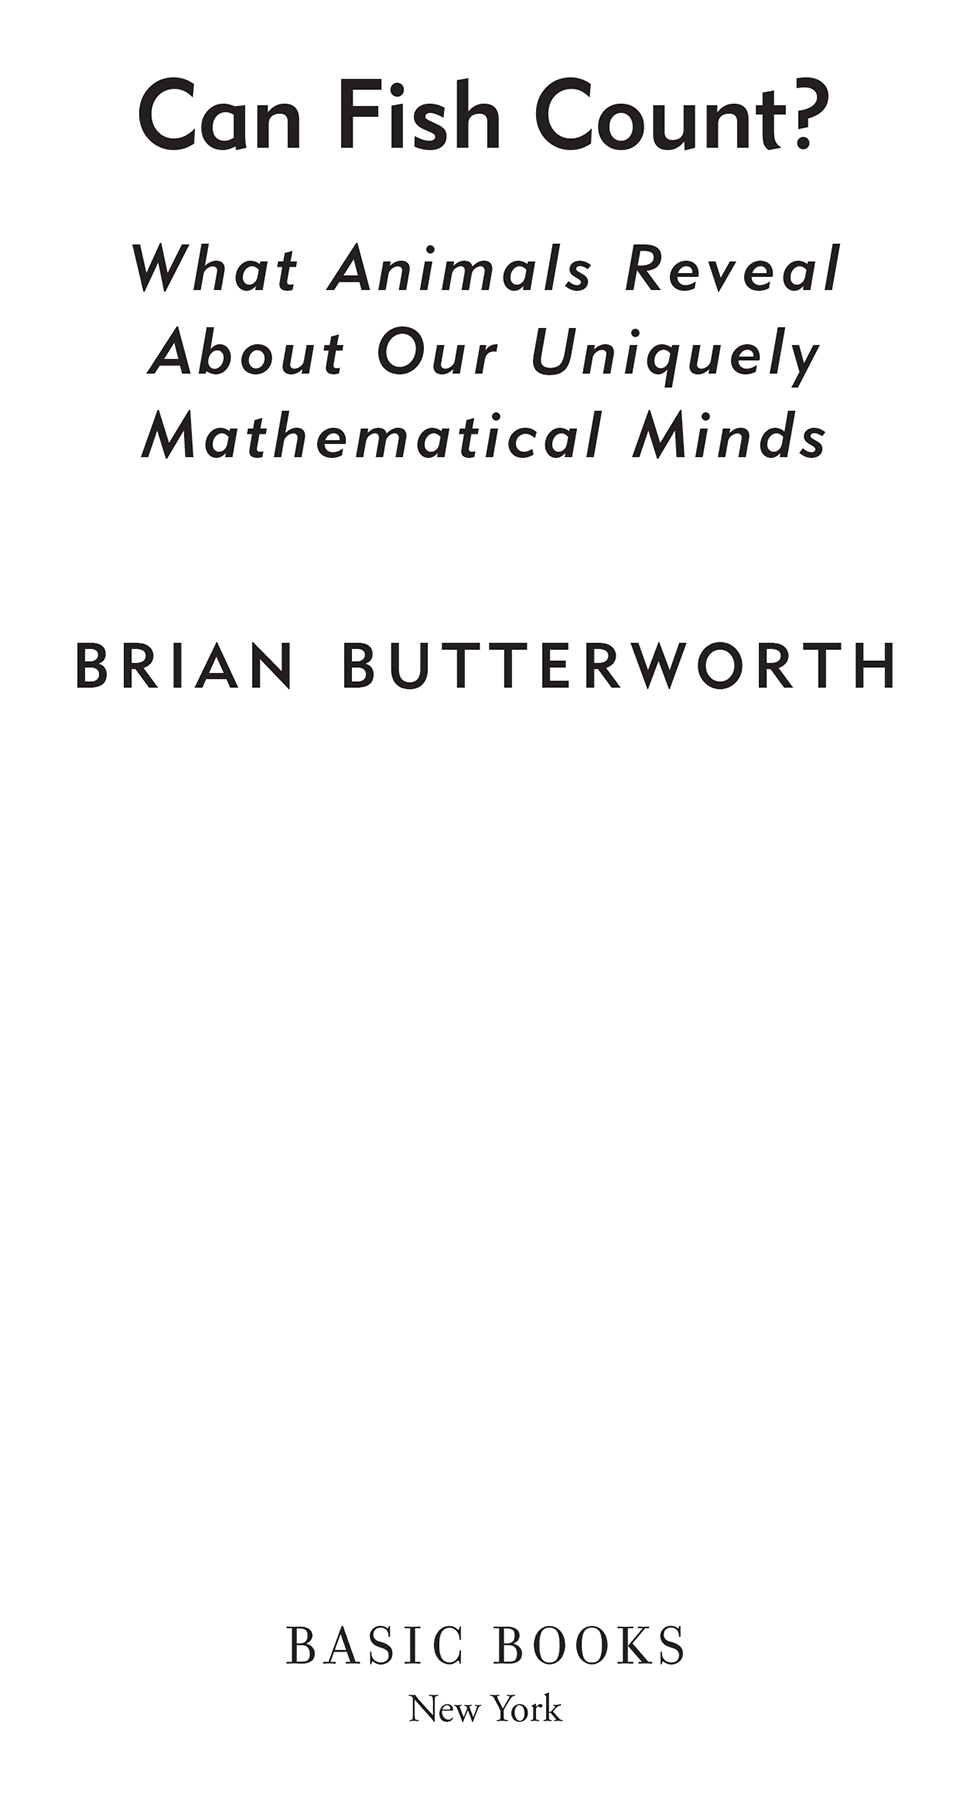 Copyright 2022 by Brian Butterworth Cover design by Chin-Yee Lai Cover images - photo 2